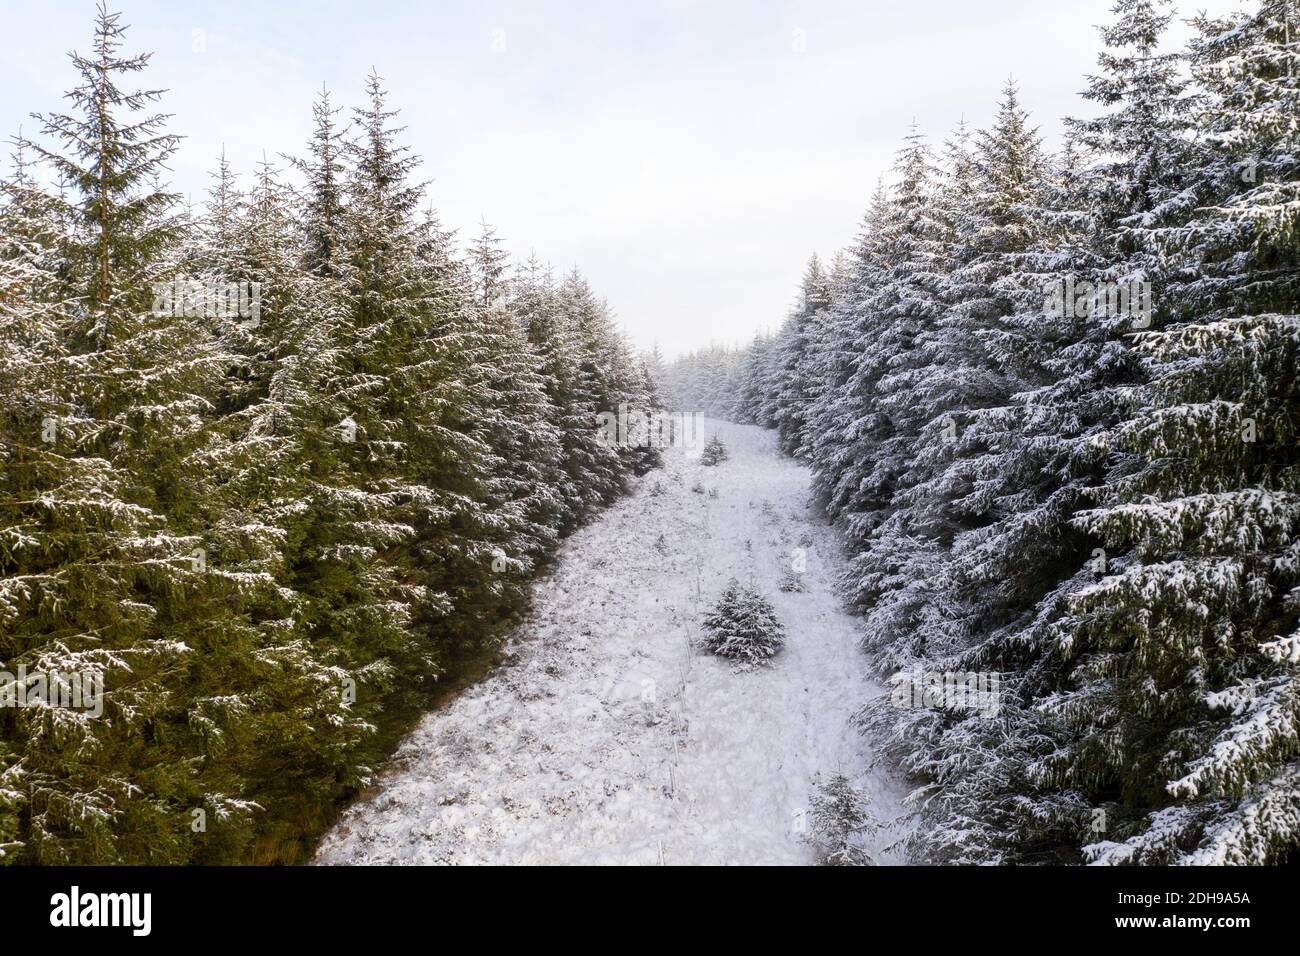 Aerial view of a forestry fire break with snow covered trees, South Lanarkshire Scotland. Stock Photo